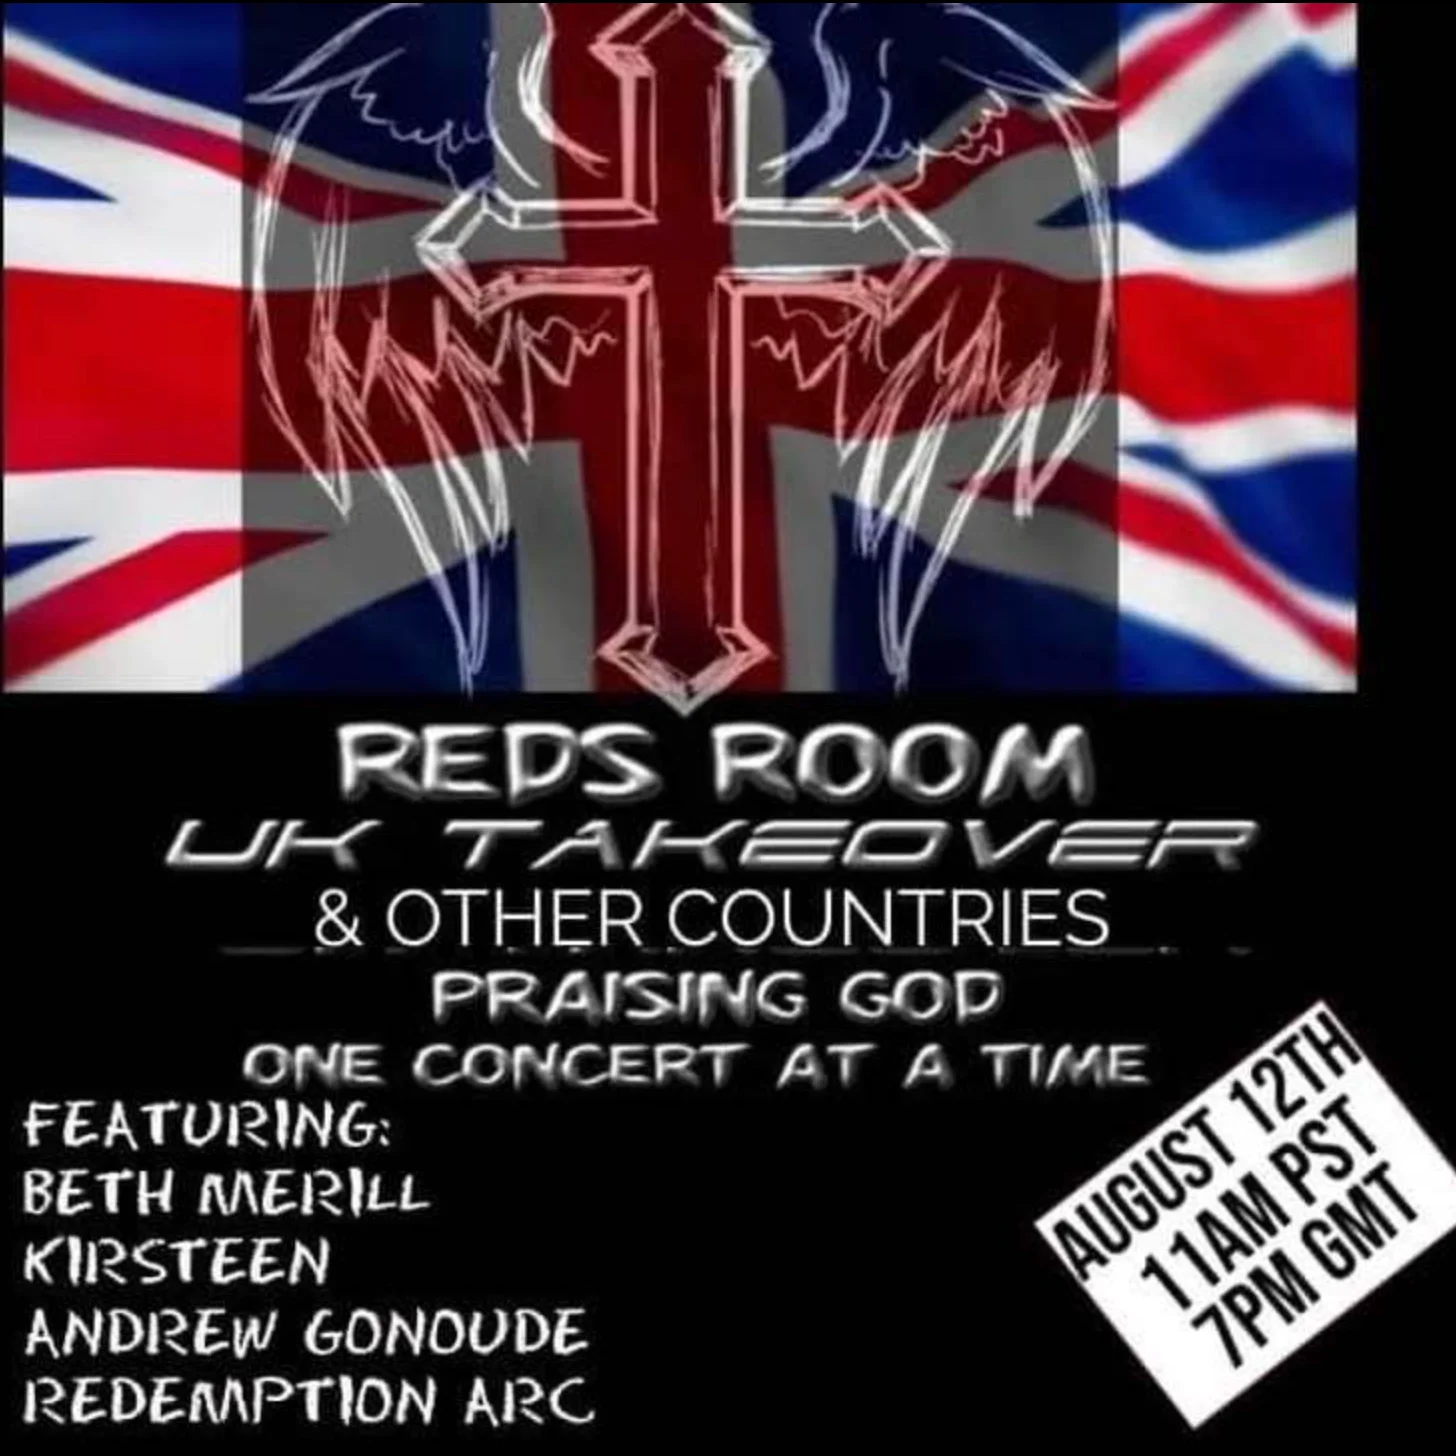 SINGING LIVE & ONLINE IN REDS ROOM, CALIFORNIA